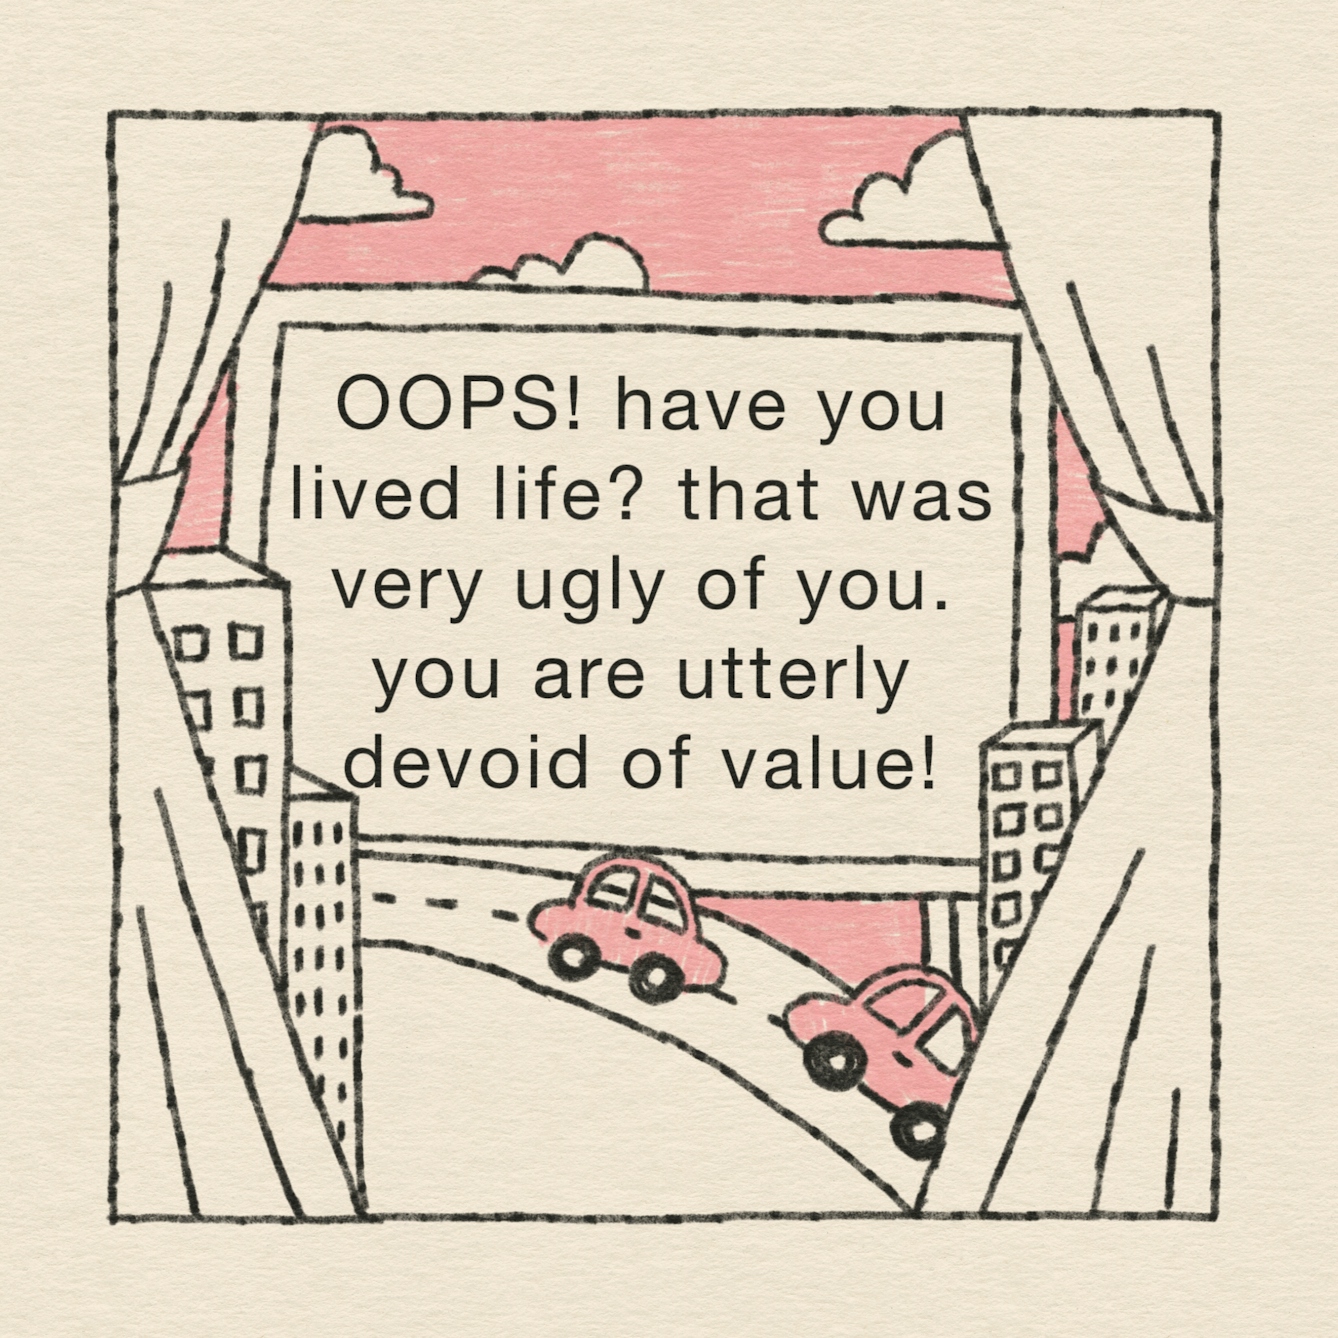 Panel 2 of 4: The curtain is pulled back to reveal a billboard on a motorway which reads: “OOPS! Have you lived life? That was very ugly of you. You are utterly devoid of value!” 